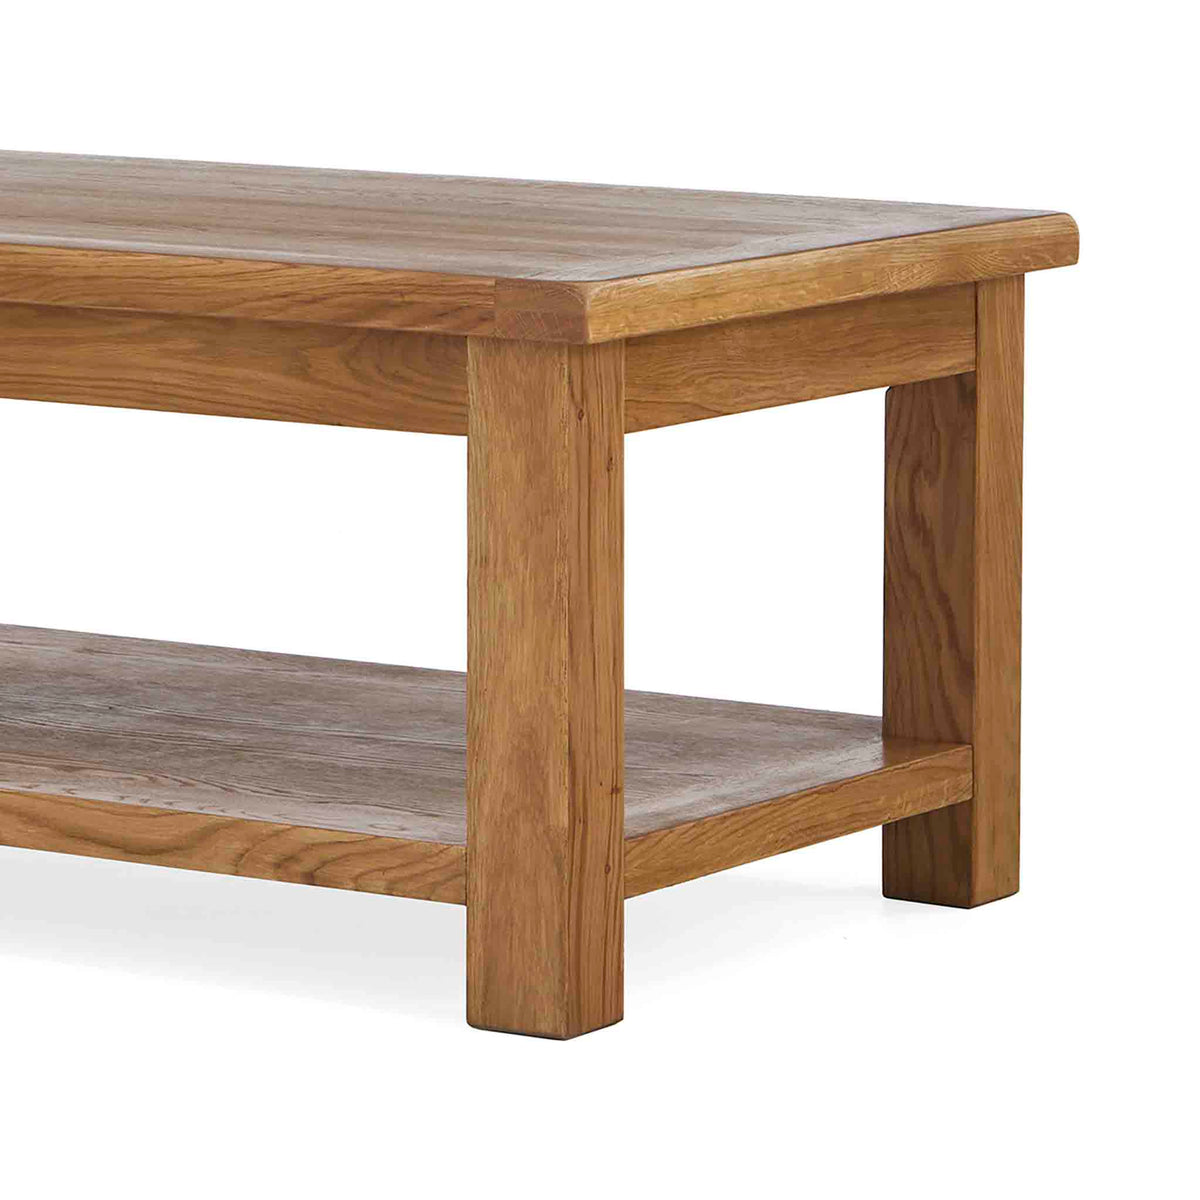 Zelah Oak Large Coffee Table - Close up of top and lower shelf